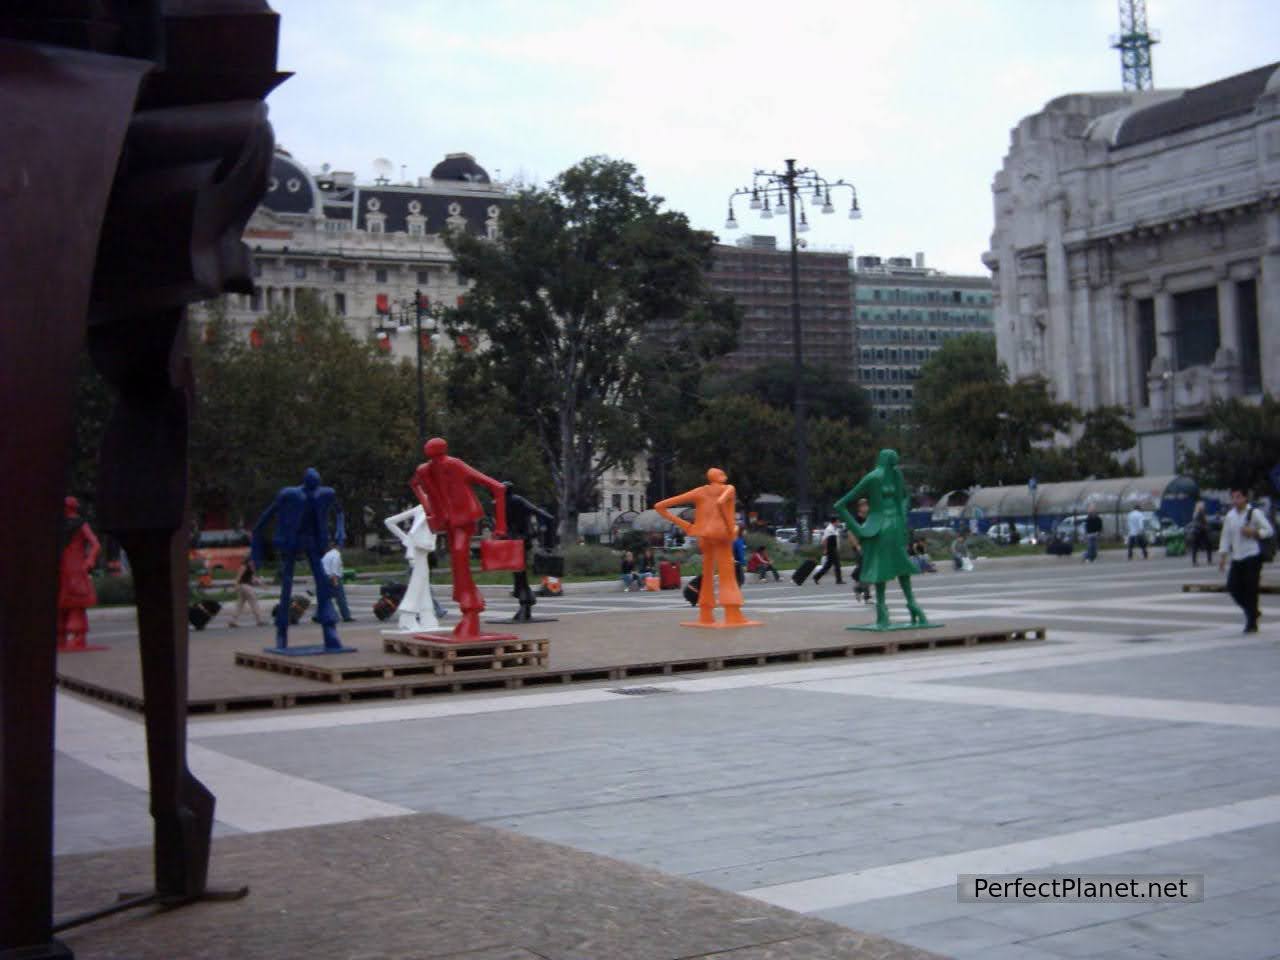 Sculptures in front of Central Station